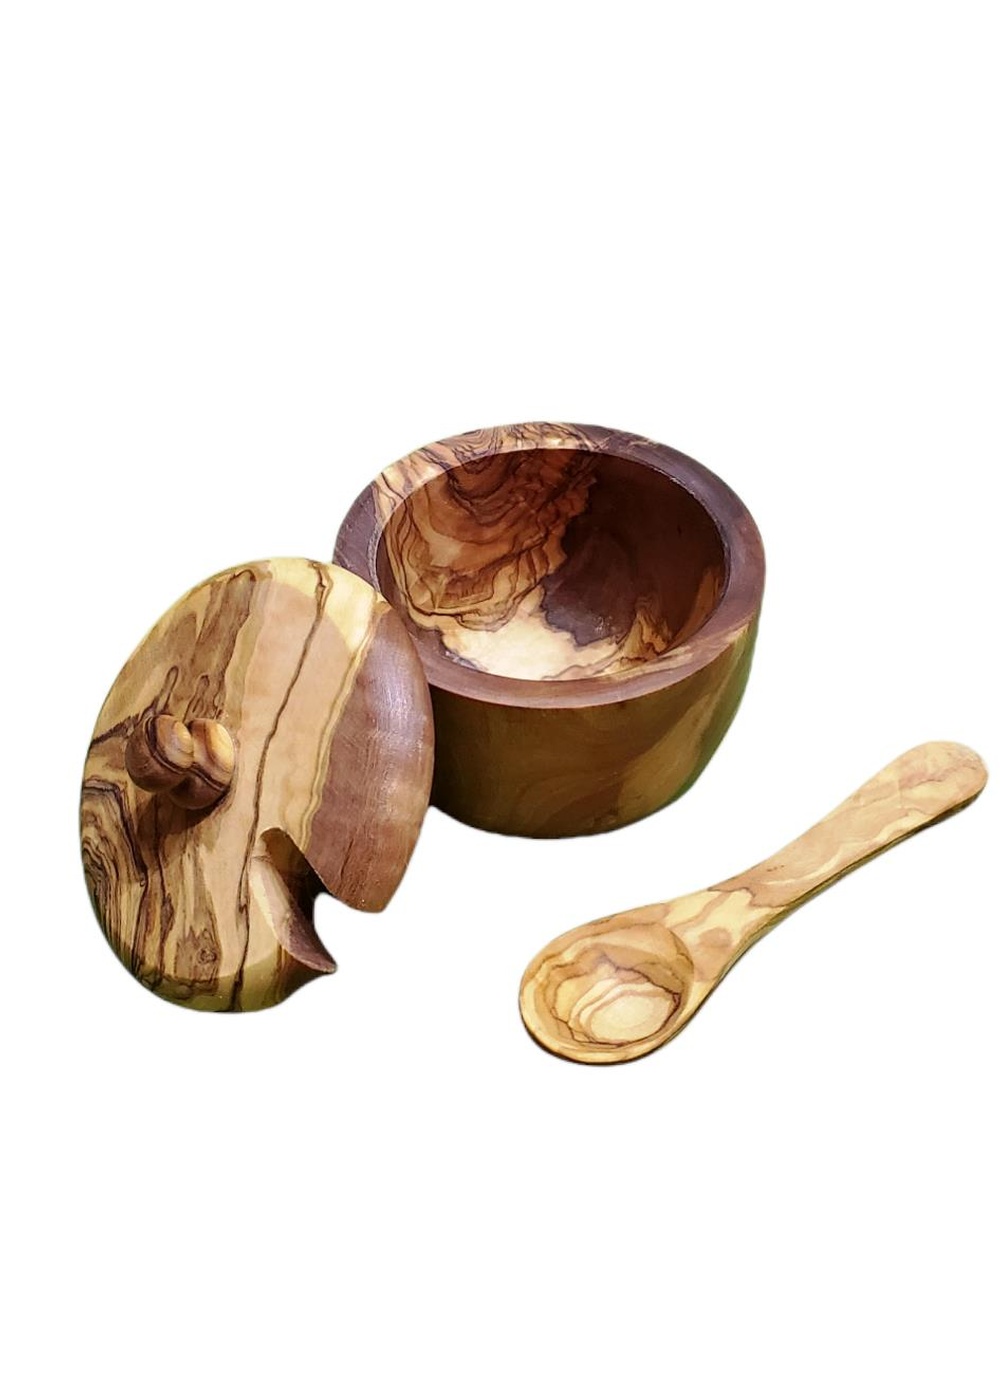 Olive_Wood_Salt-Spice_Container_With_Spoon_2.jpg